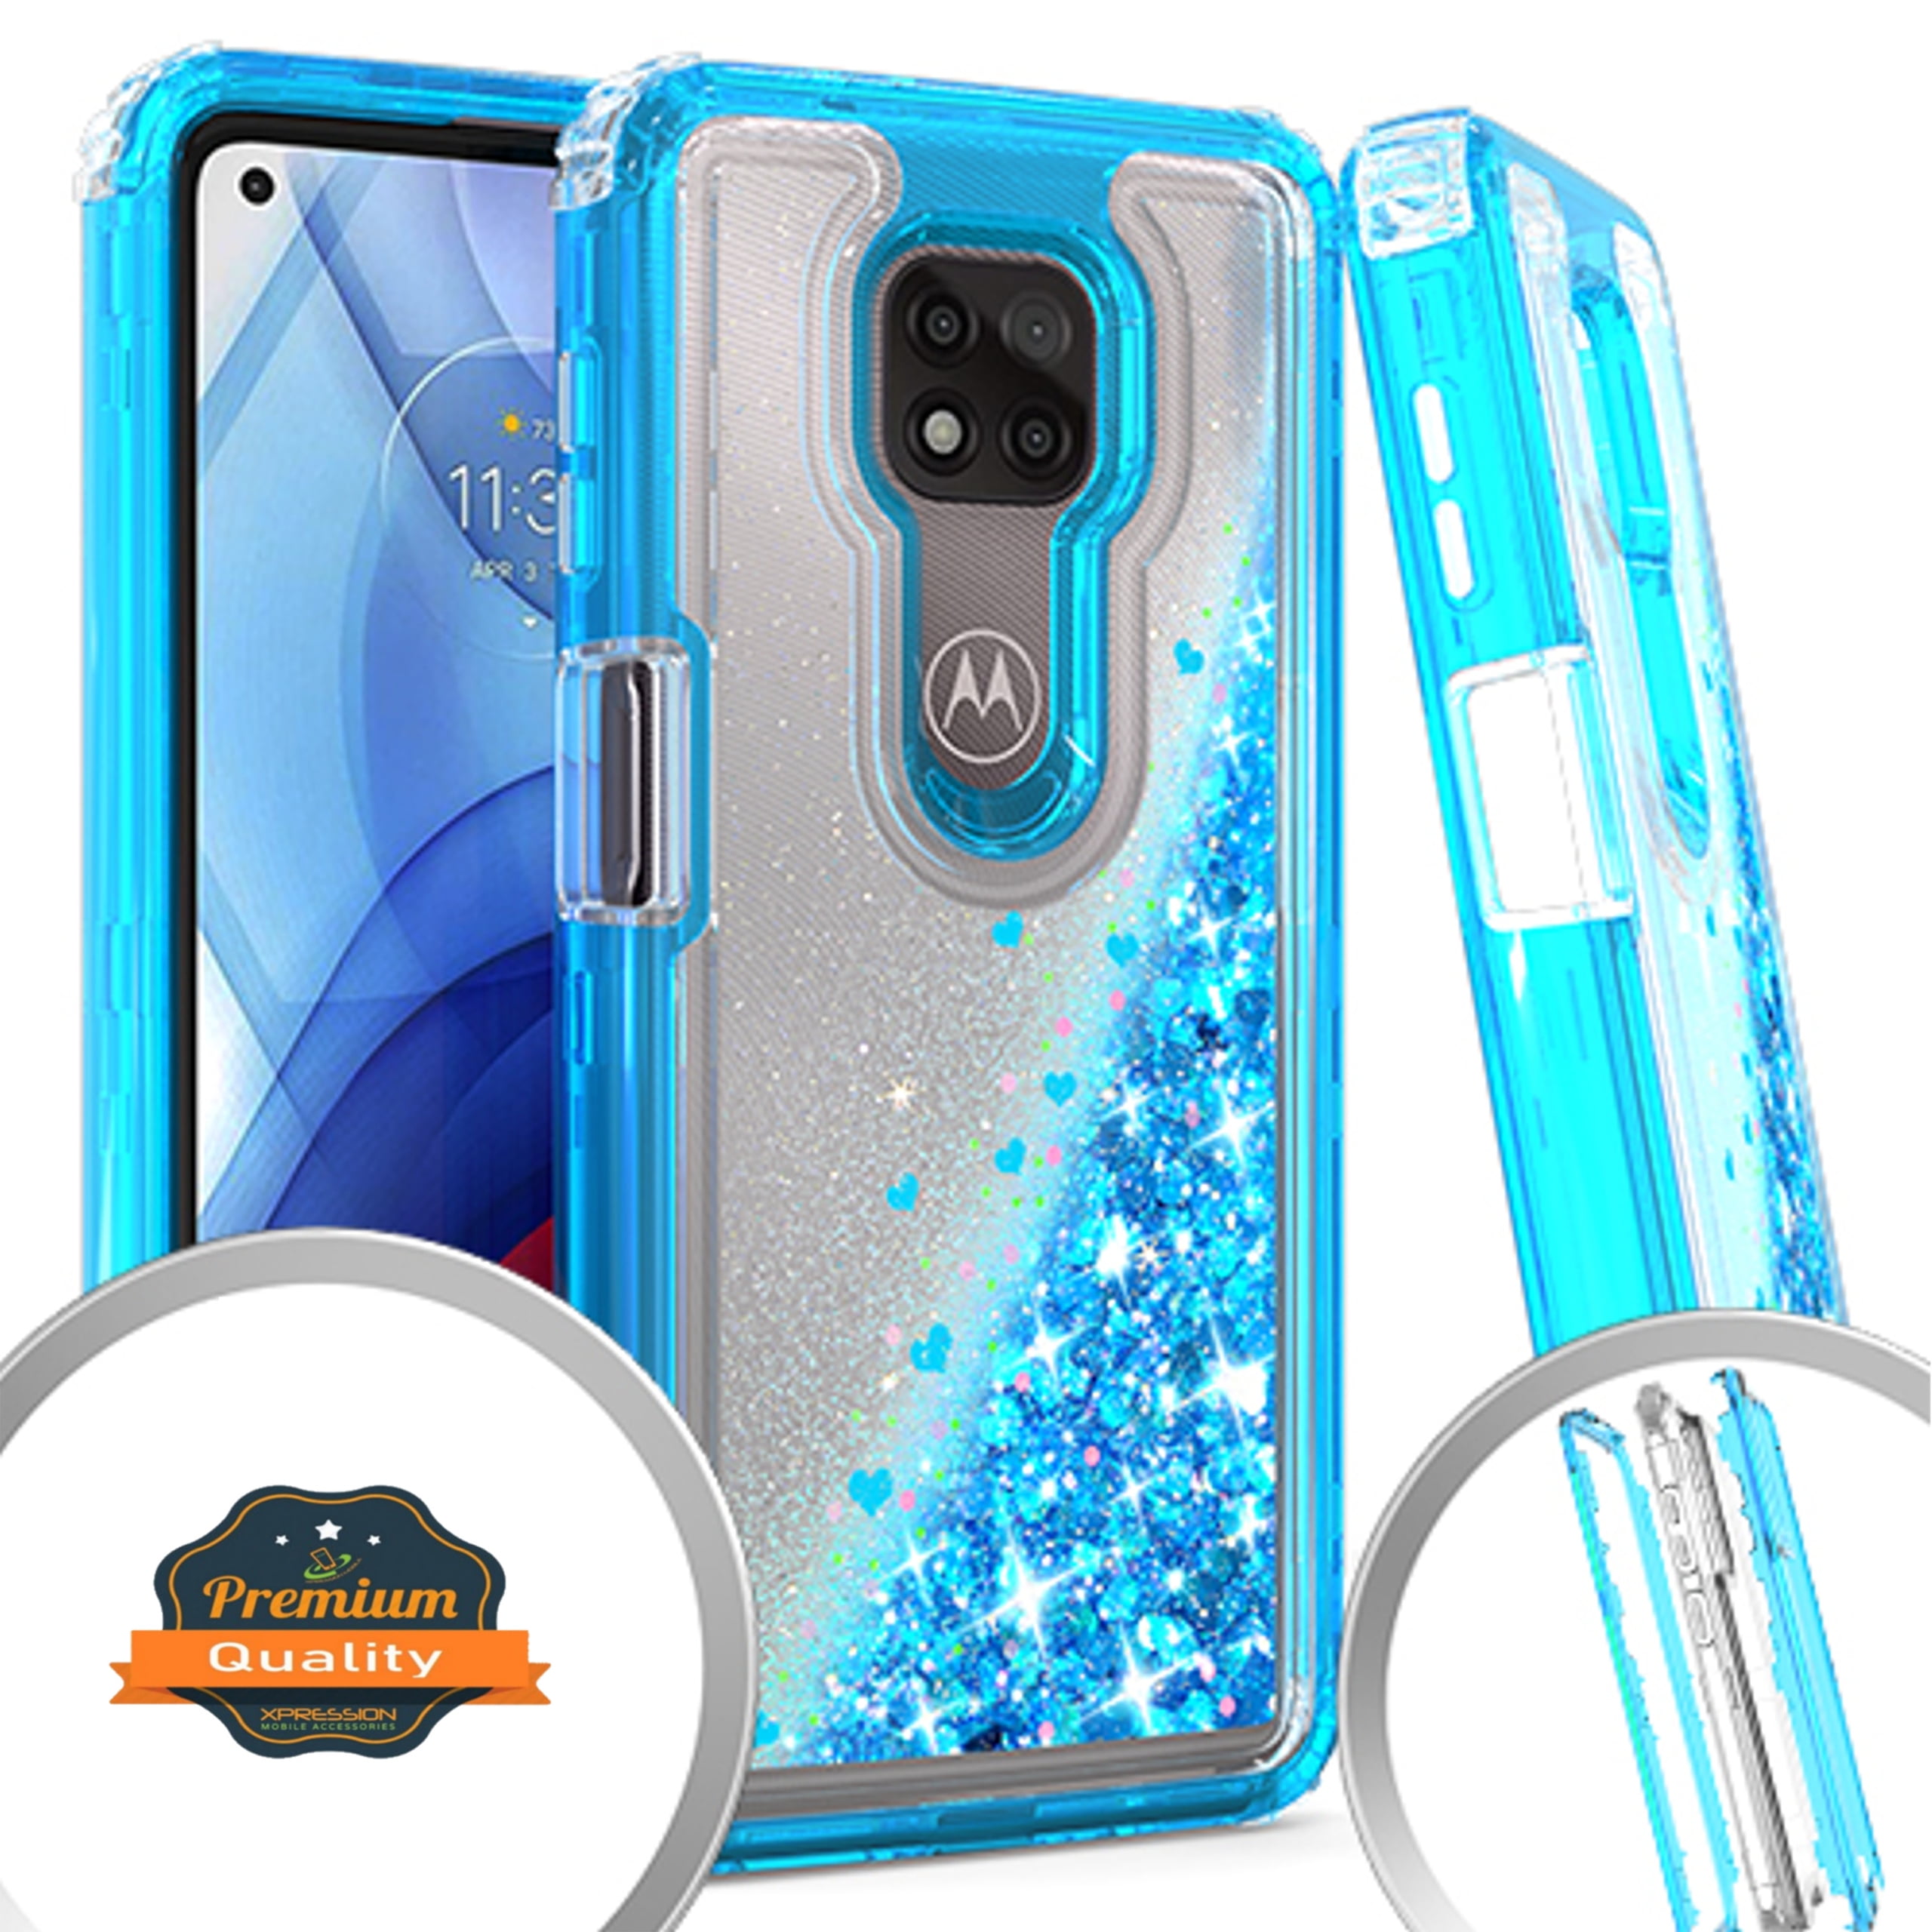 Xpression Case for Motorola Moto G Play 2021 Liquid Quicksand Bling Sparkle Heavy 3 in 1 Hybrid Shockproof Bumper Phone Cover [Blue] - Walmart.com